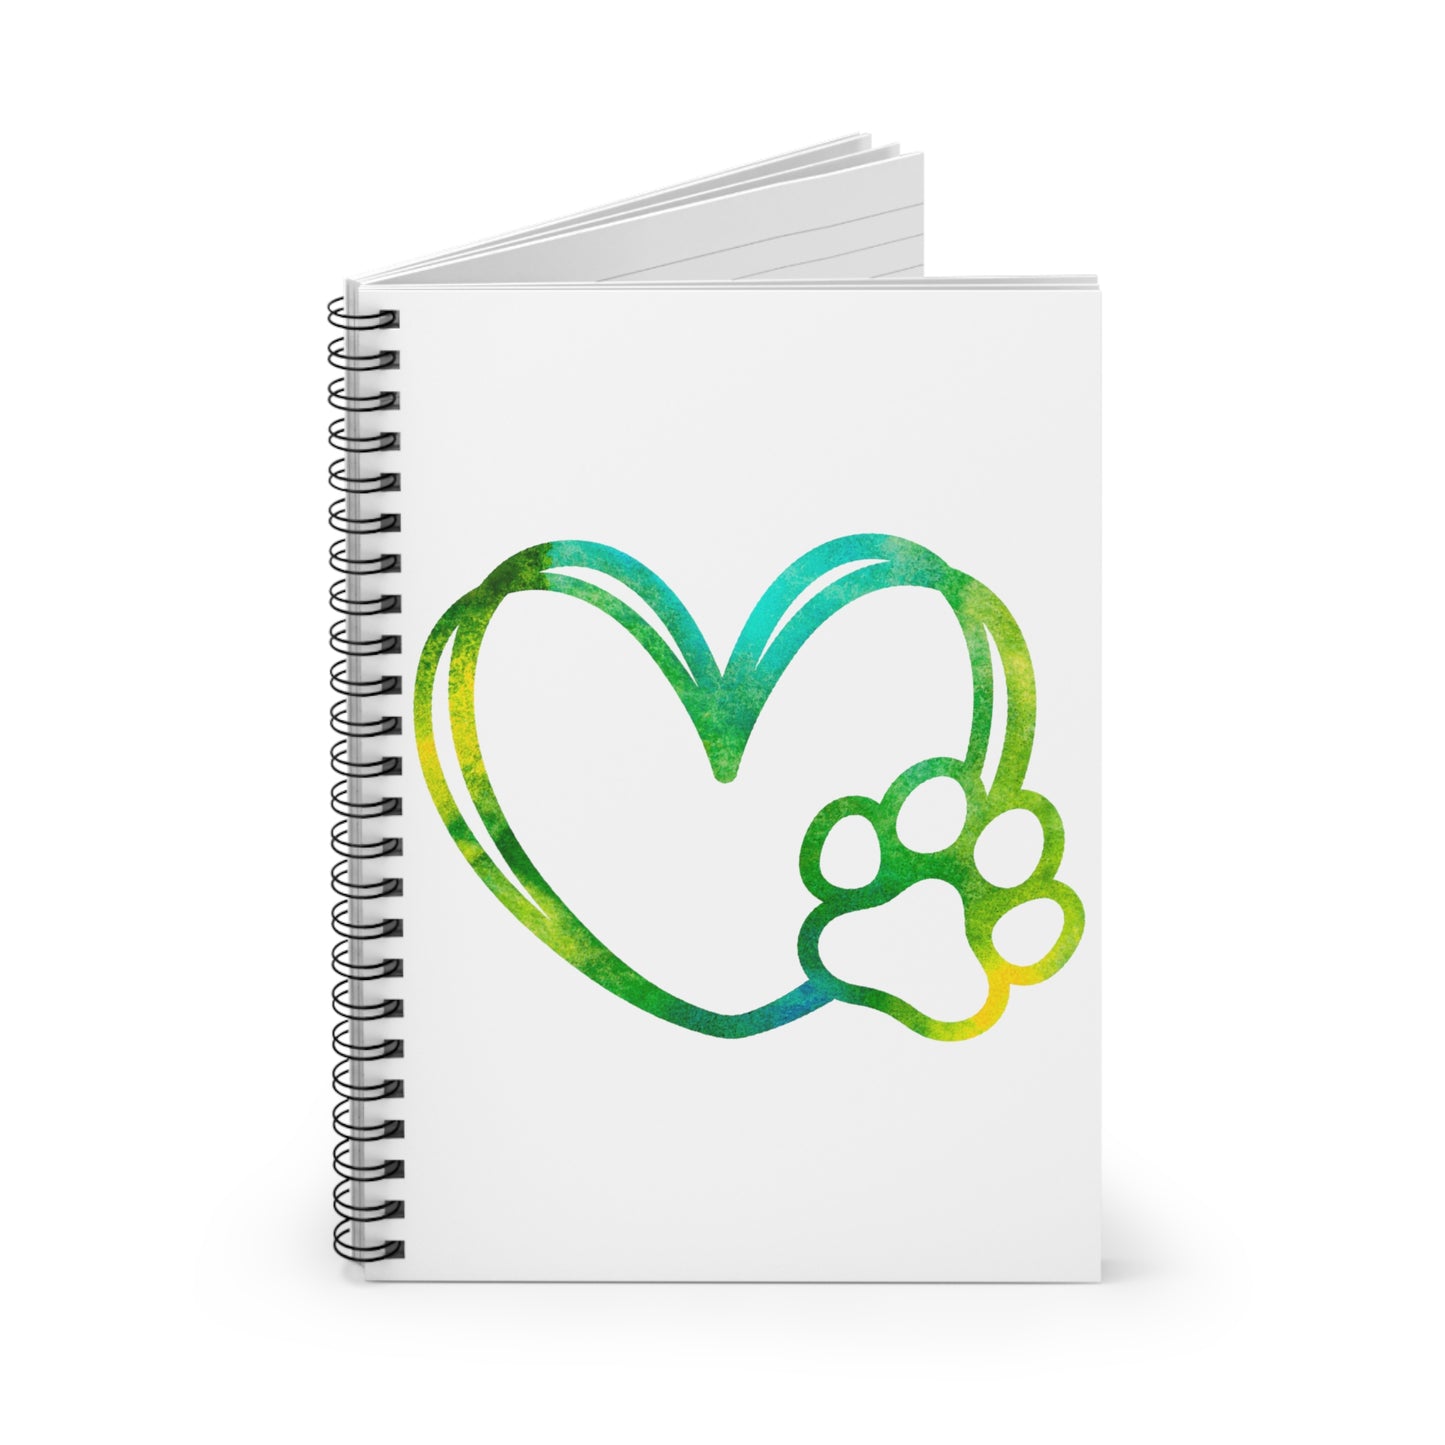 Paw Heart: Spiral Notebook - Log Books - Journals - Diaries - and More Custom Printed by TheGlassyLass.com